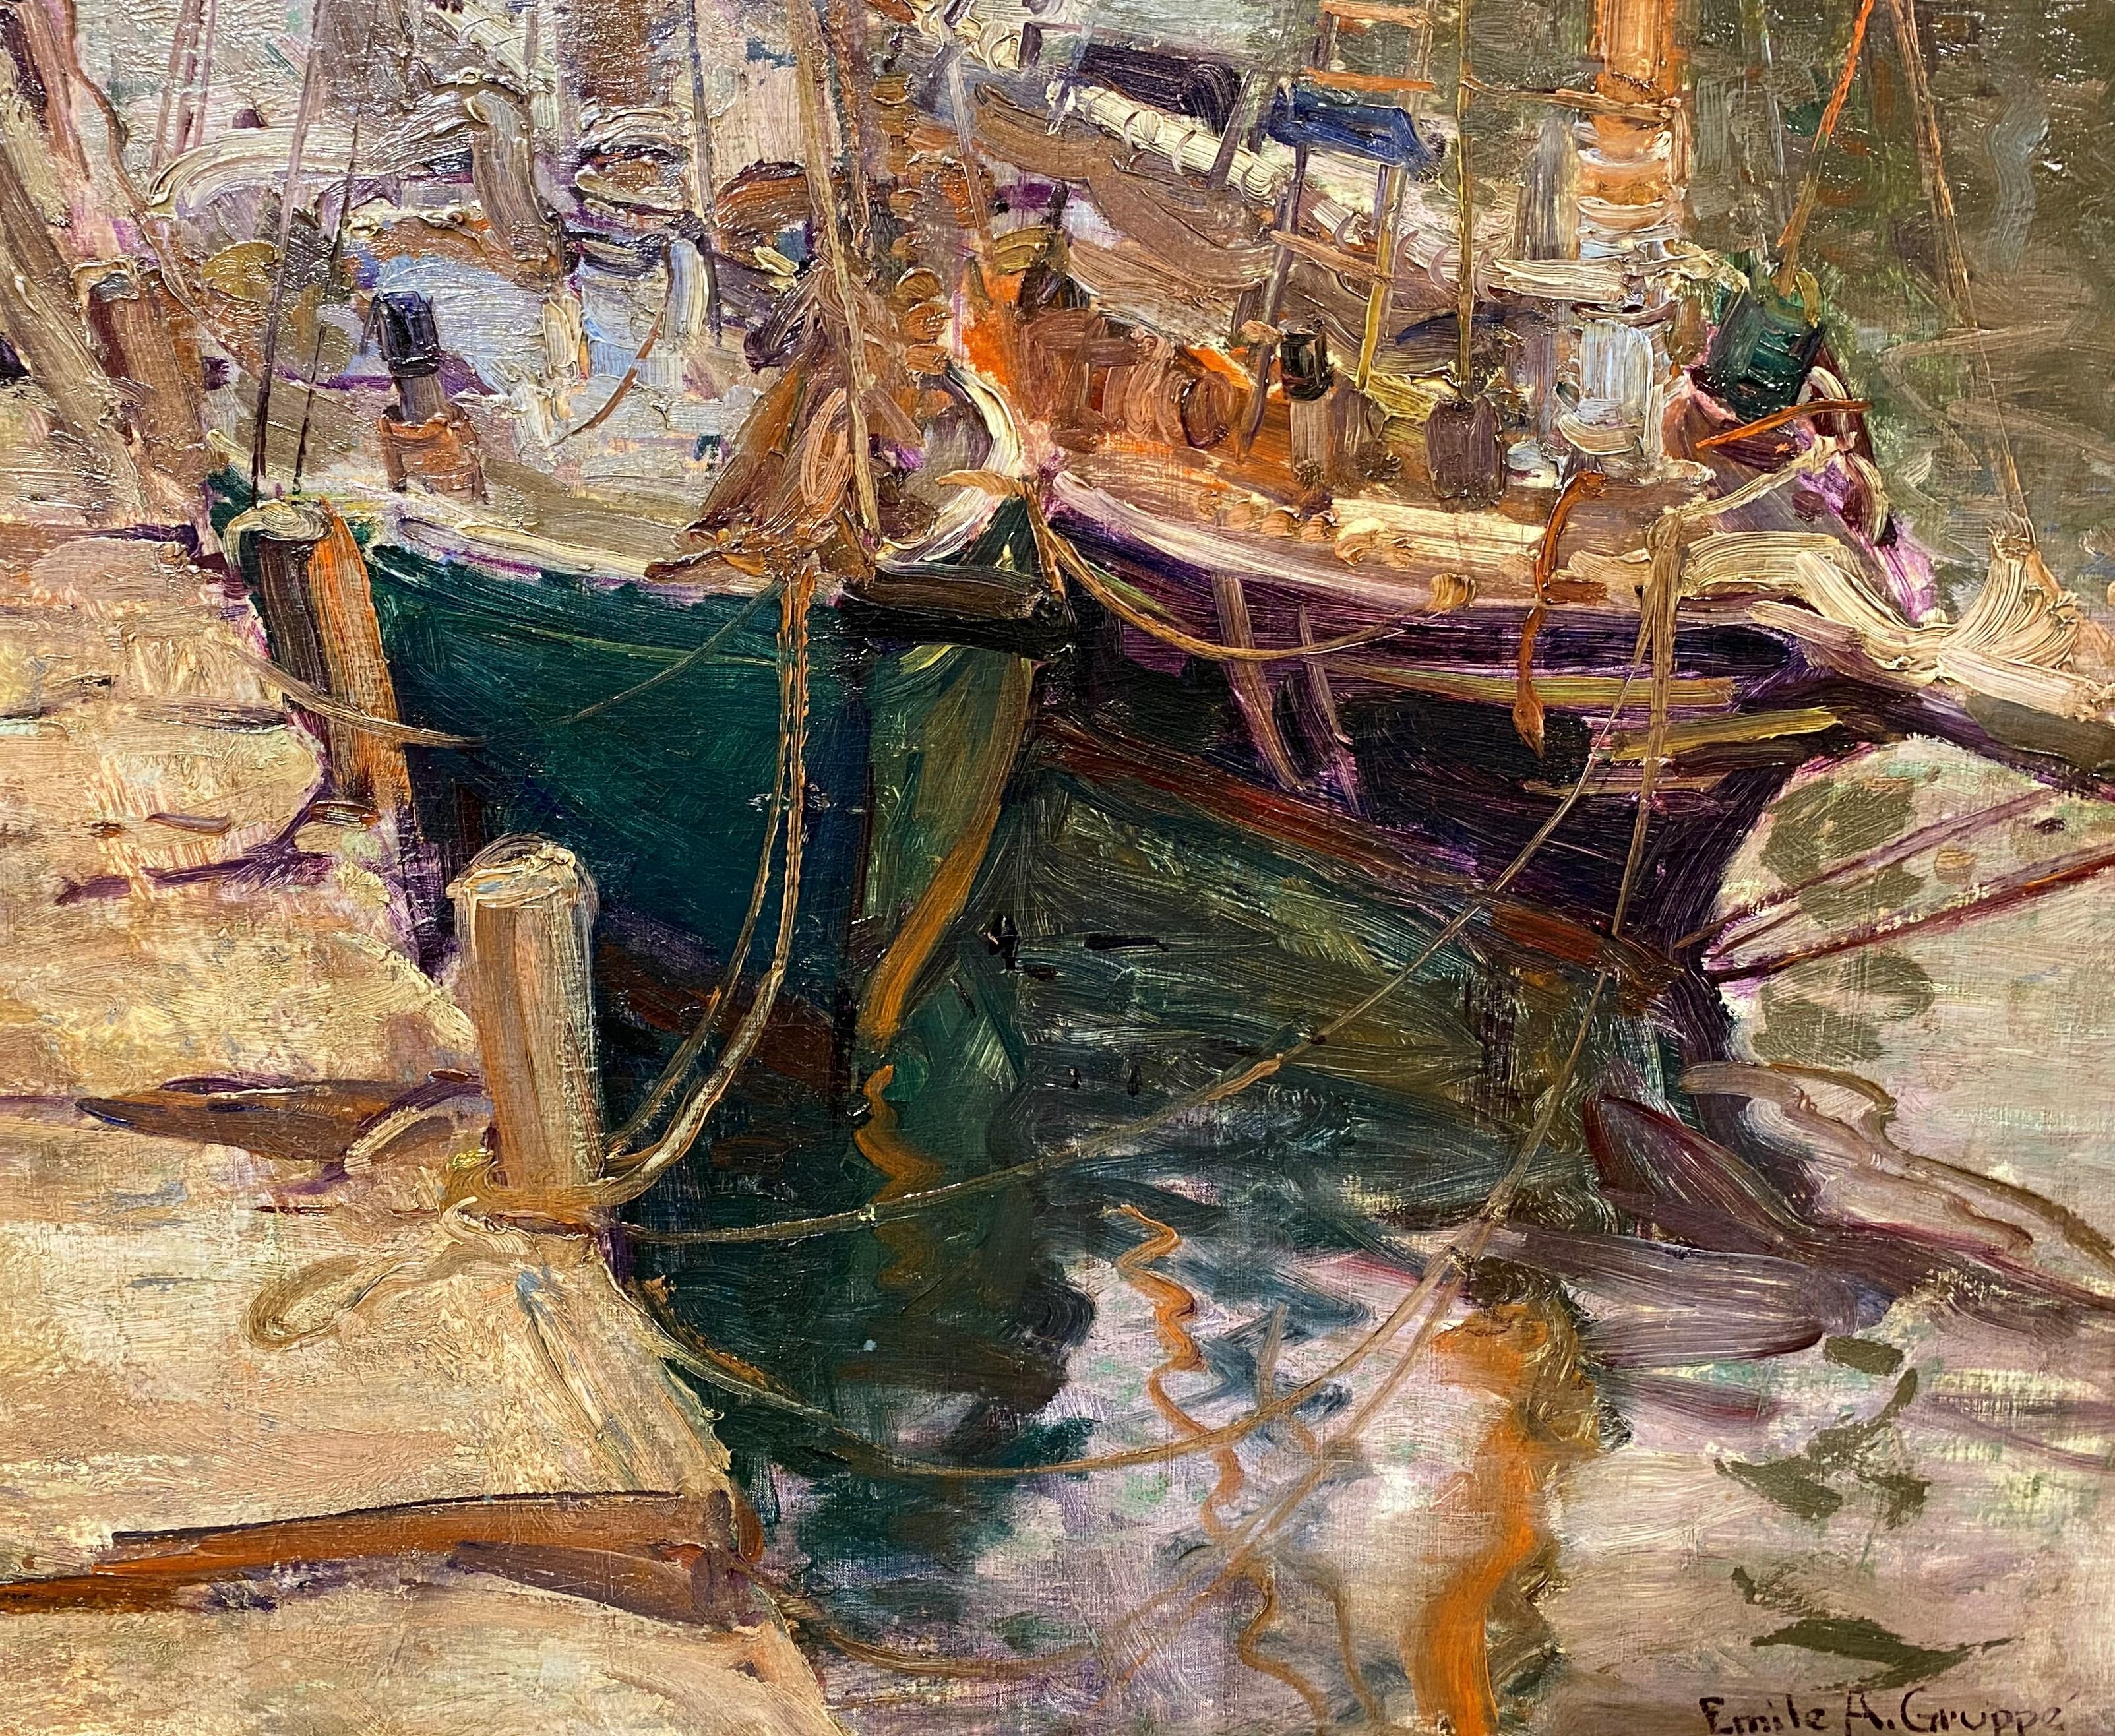 Gloucester Boats - American Impressionist Painting by Emile Albert Gruppe